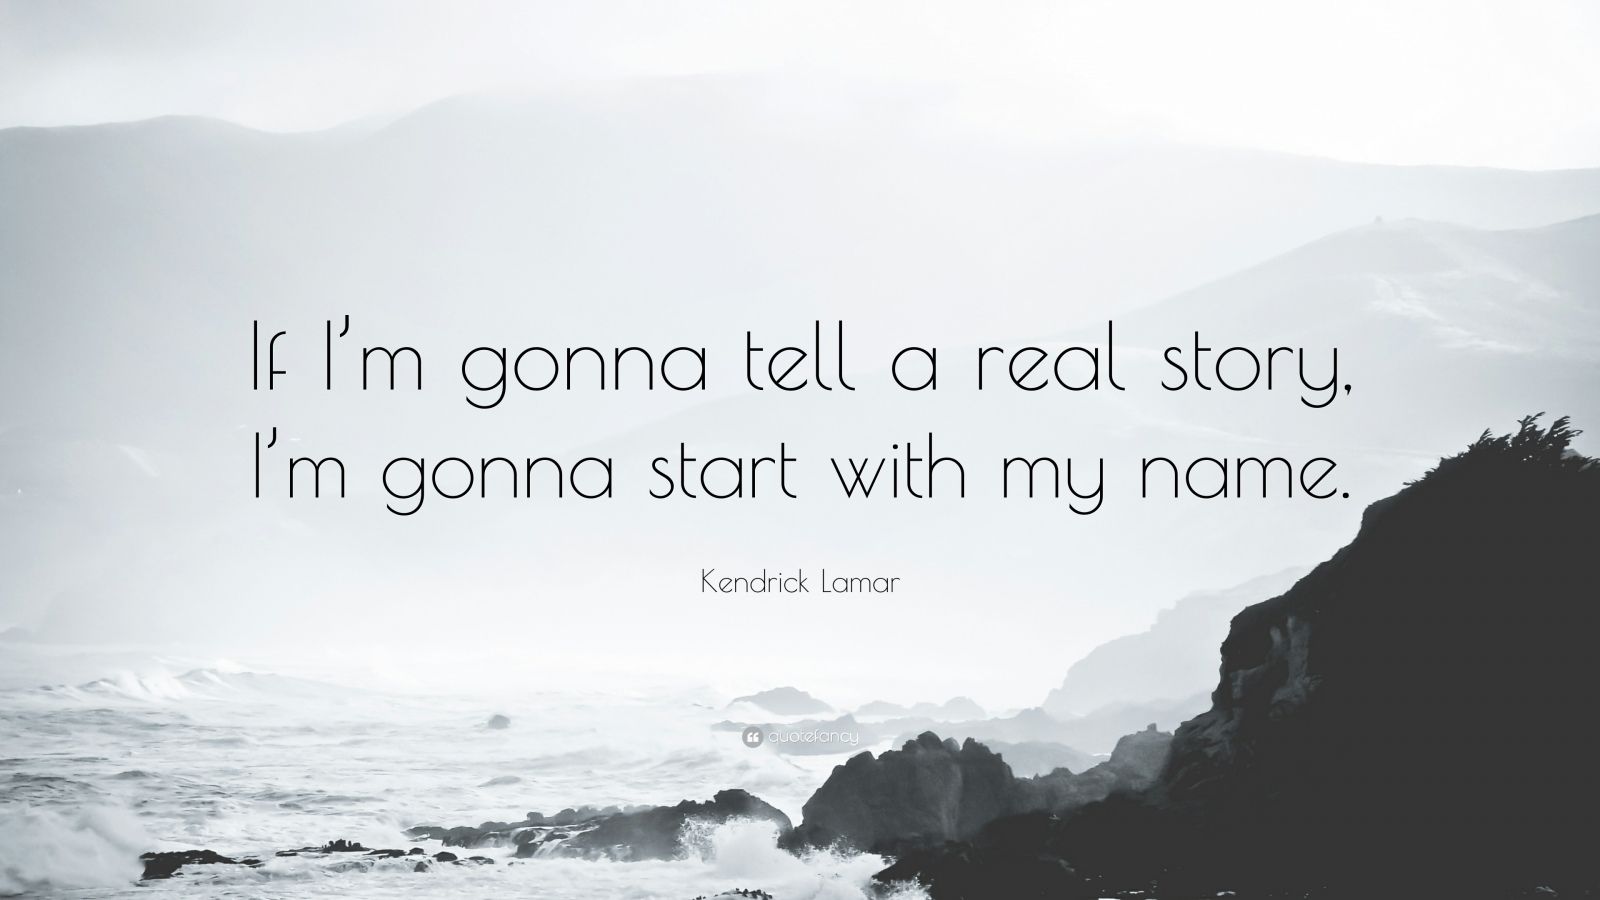 Kendrick Lamar Quote: “If I’m gonna tell a real story, I’m gonna start with my name.”